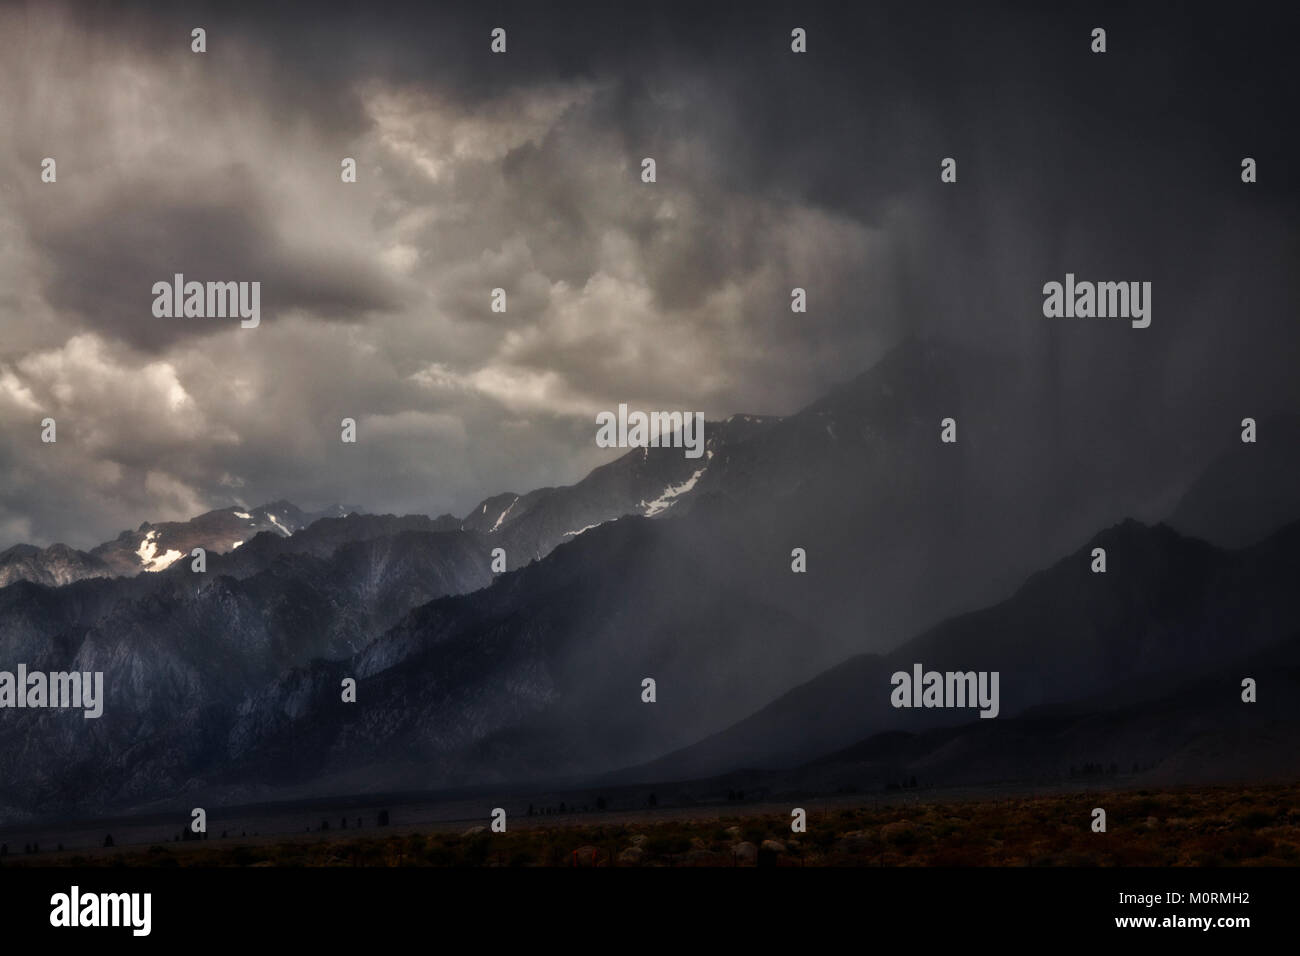 Eastern Sierra Nevada Mountains during Thunderstorm, Highway 395 near Lone Pine, Owens Valley, Inyo County, California, USA Stock Photo